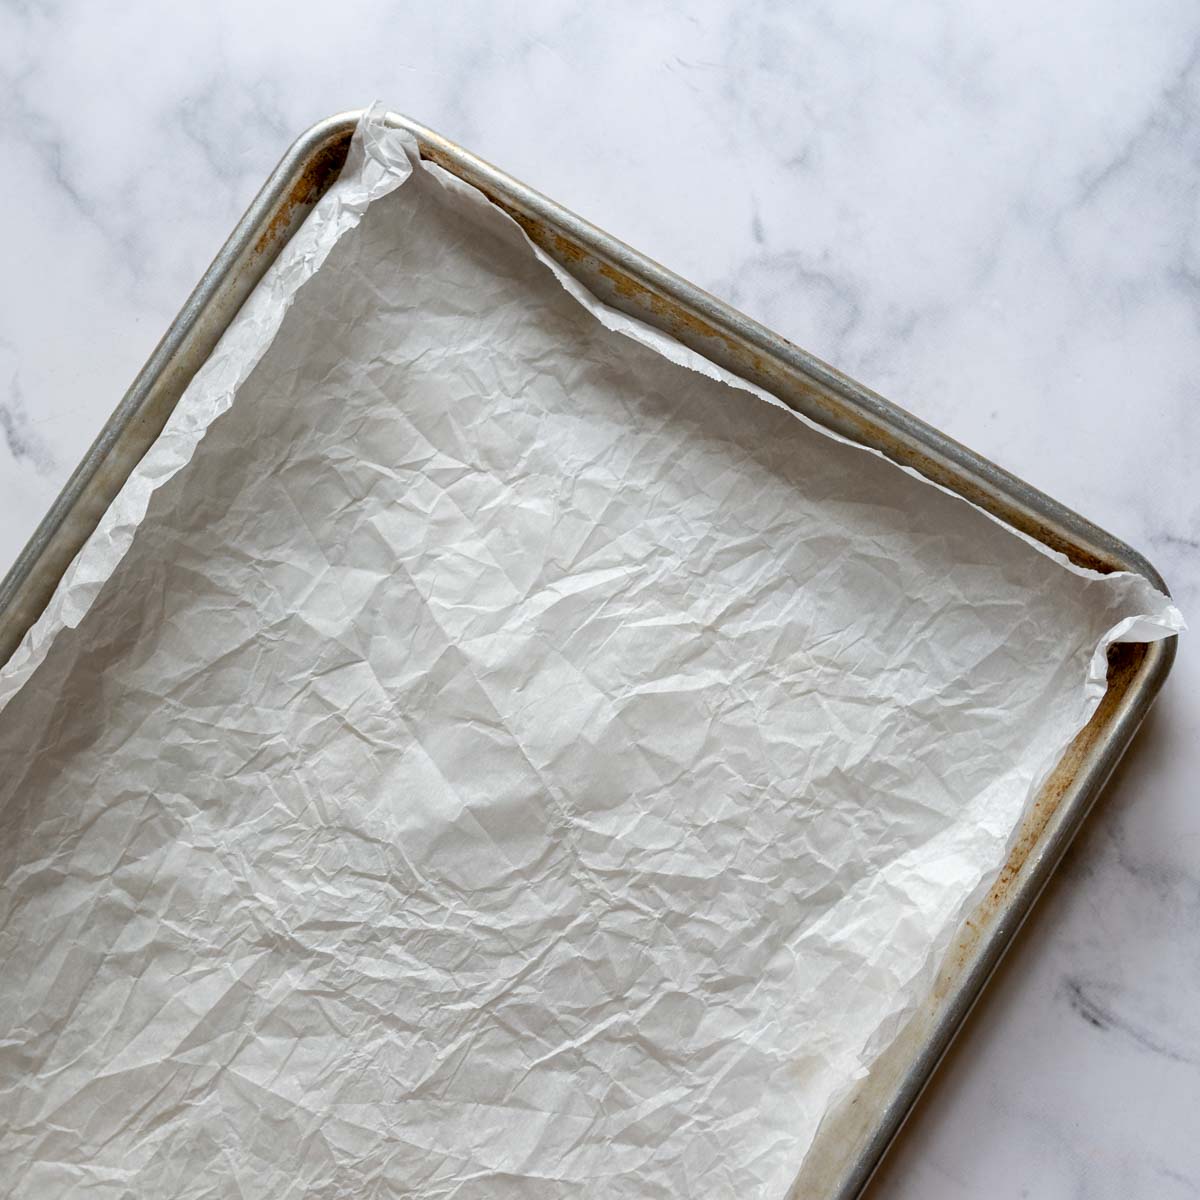 a baking sheet with parchment on it.